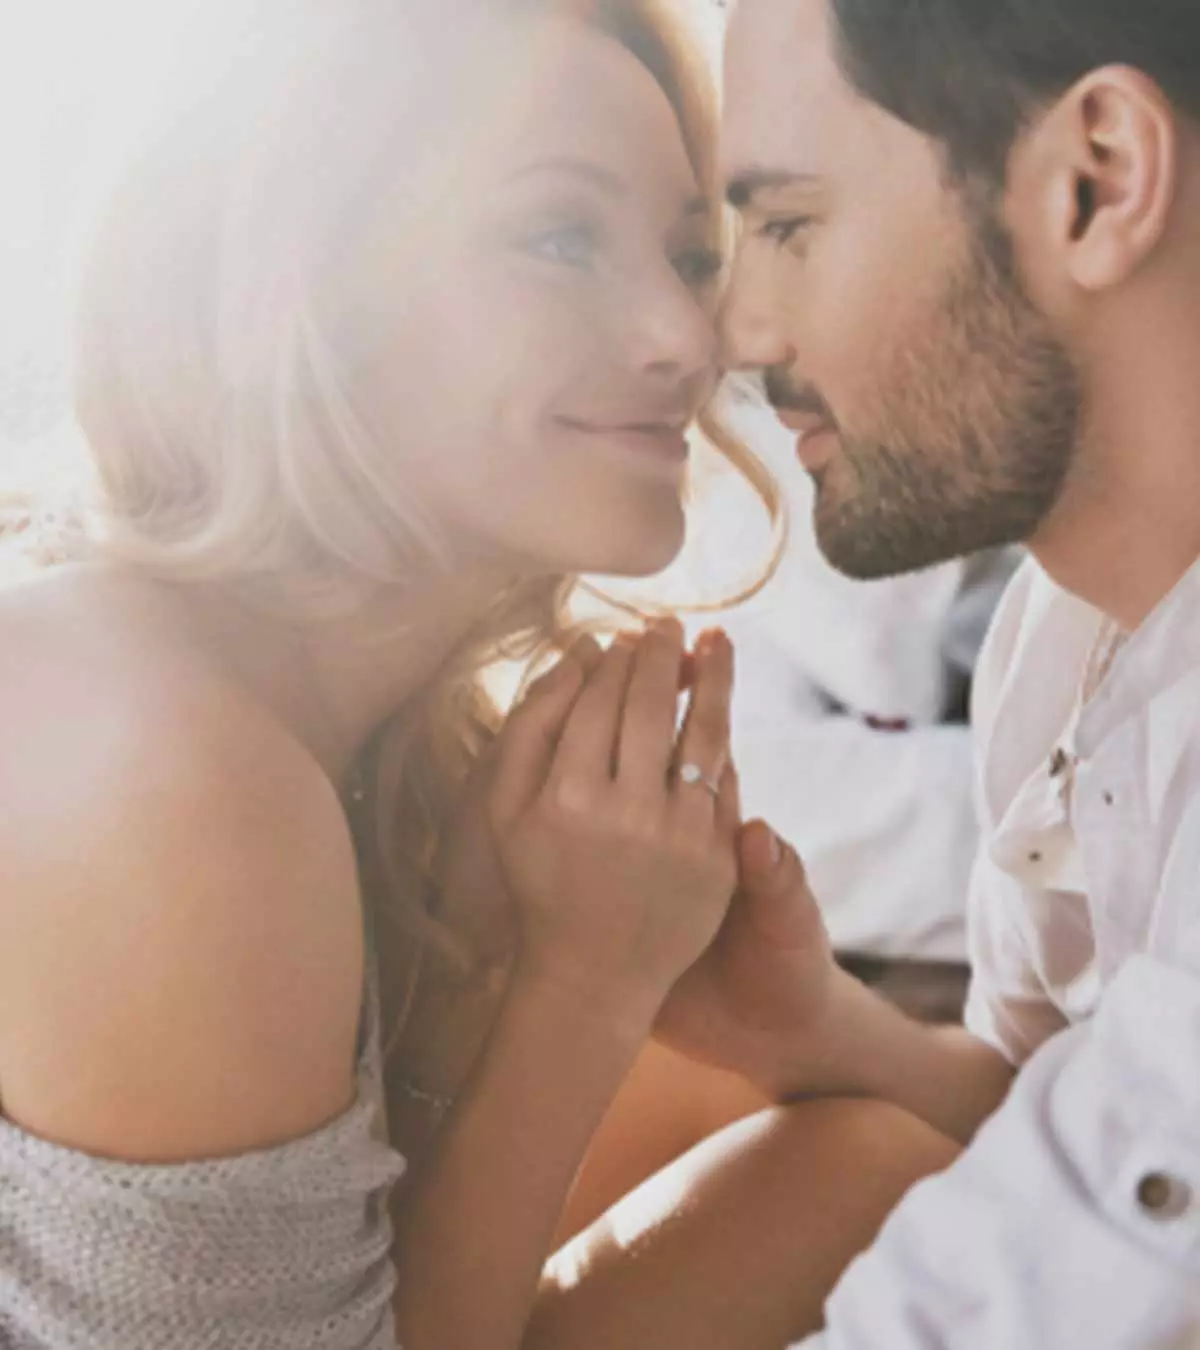 25+ Signs He Cares About You (More Than You Think)